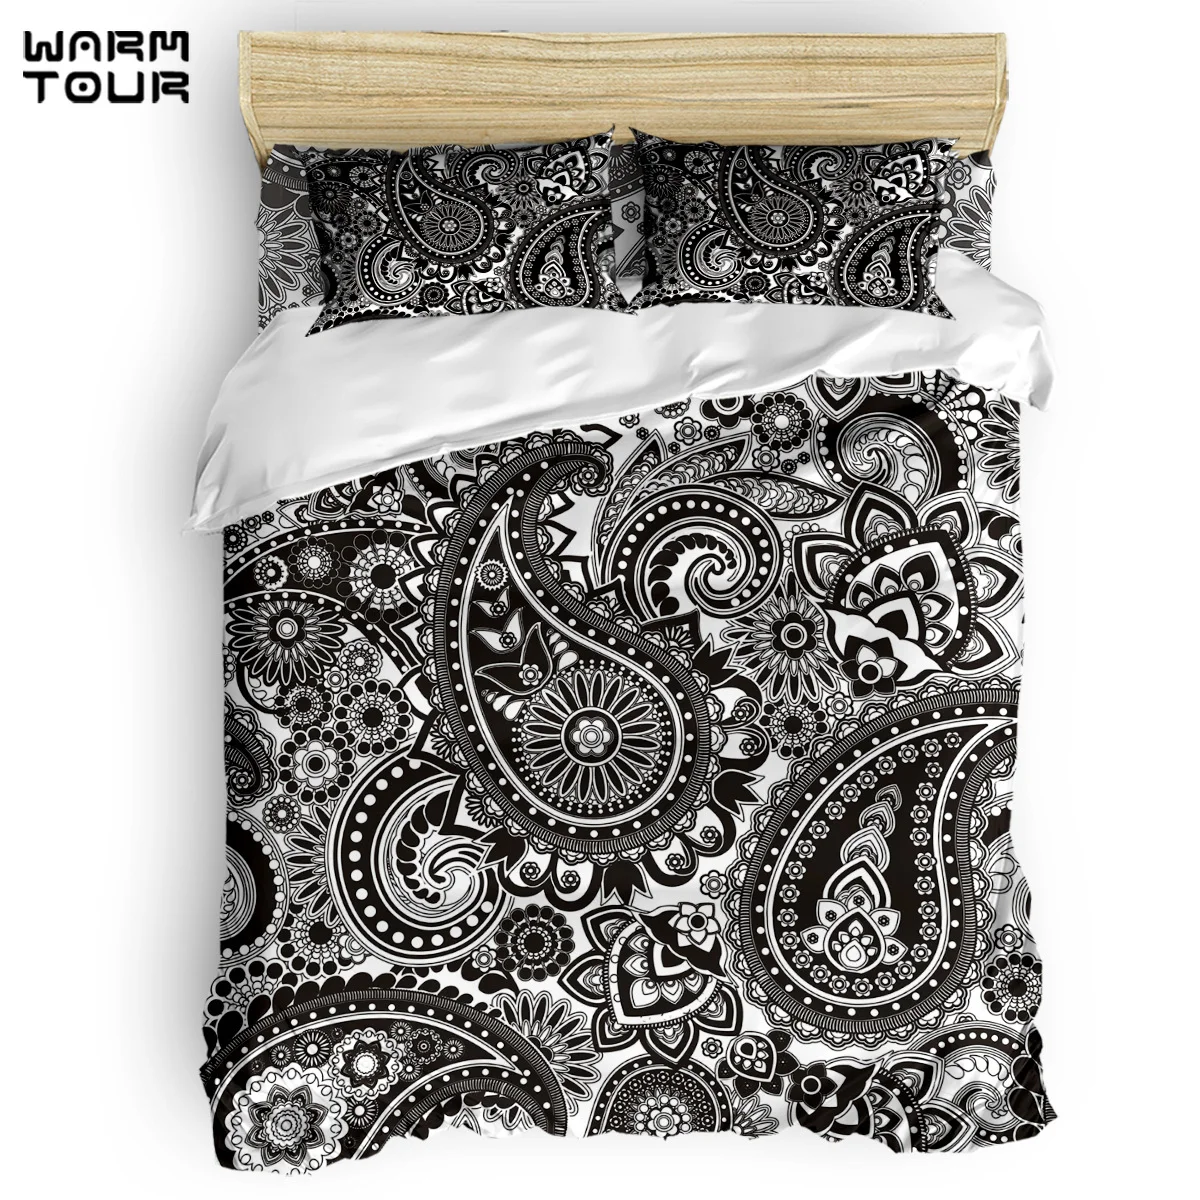 

WARMTOUR Duvet Cover Black And White Paisley Duvet Cover Set 4 Piece Bedding Set For Beds DHL Shipping Methods